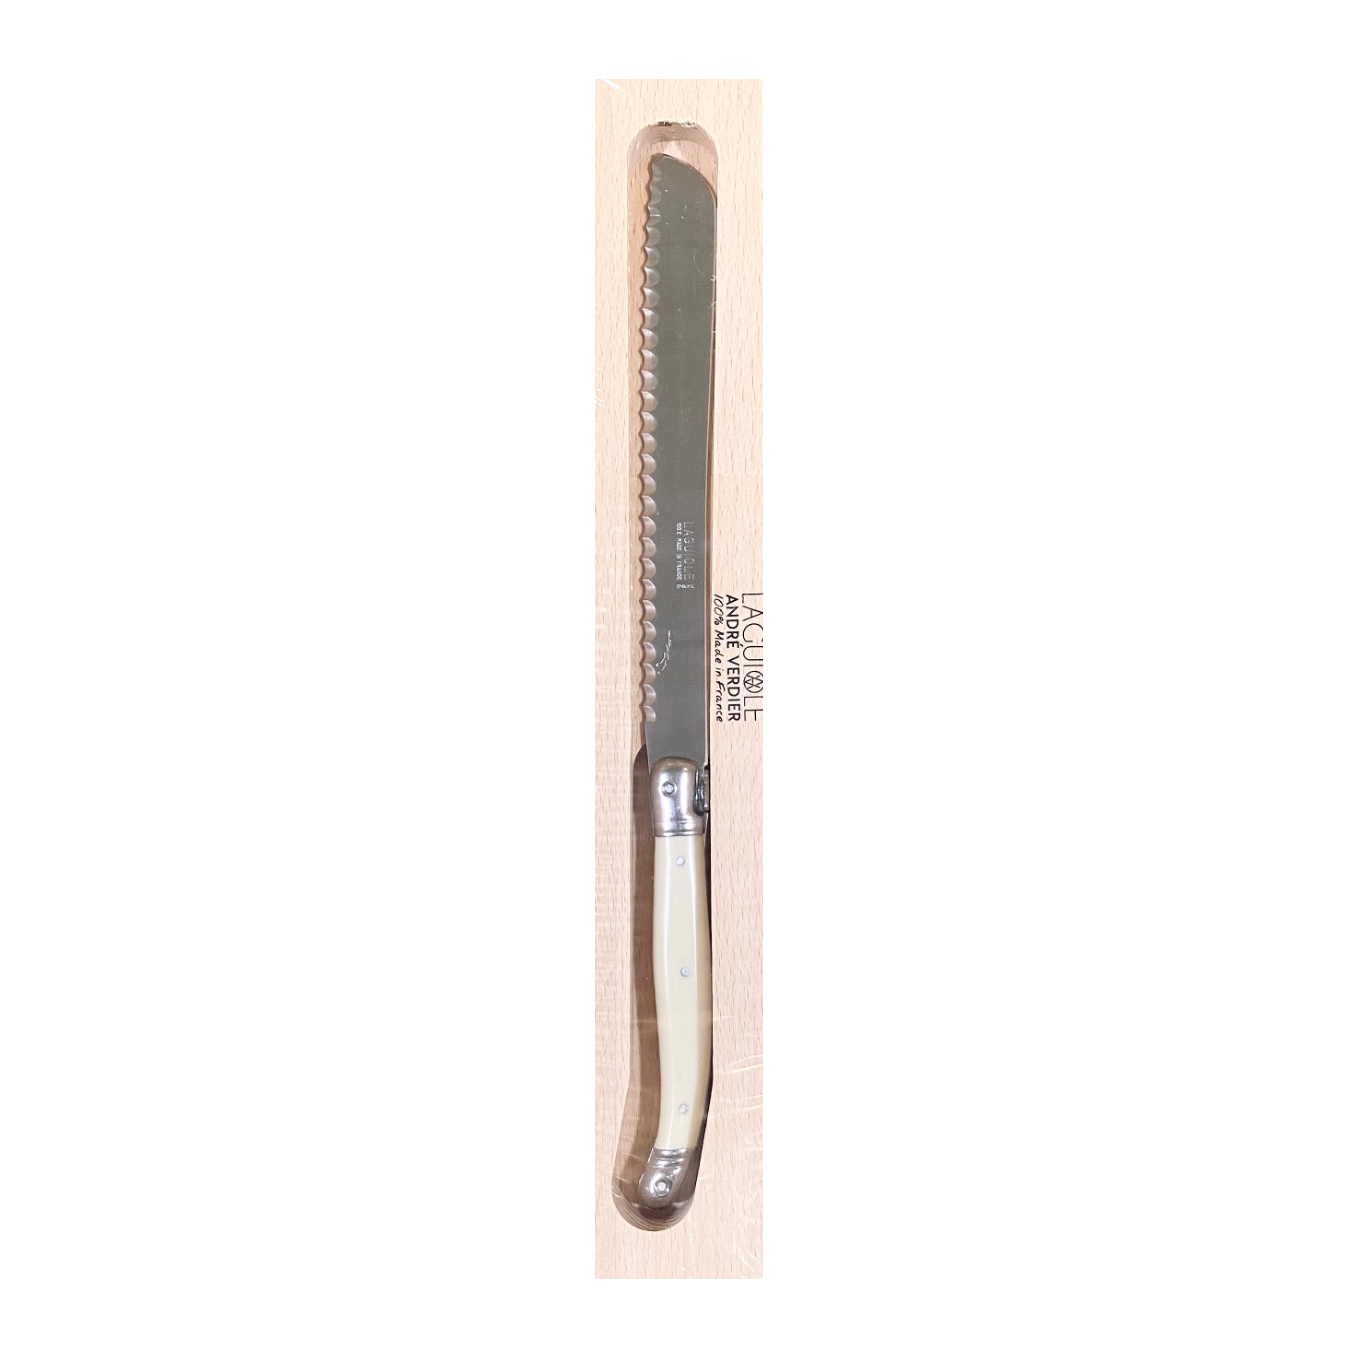 Laguiole French Bread Knife - Ivory